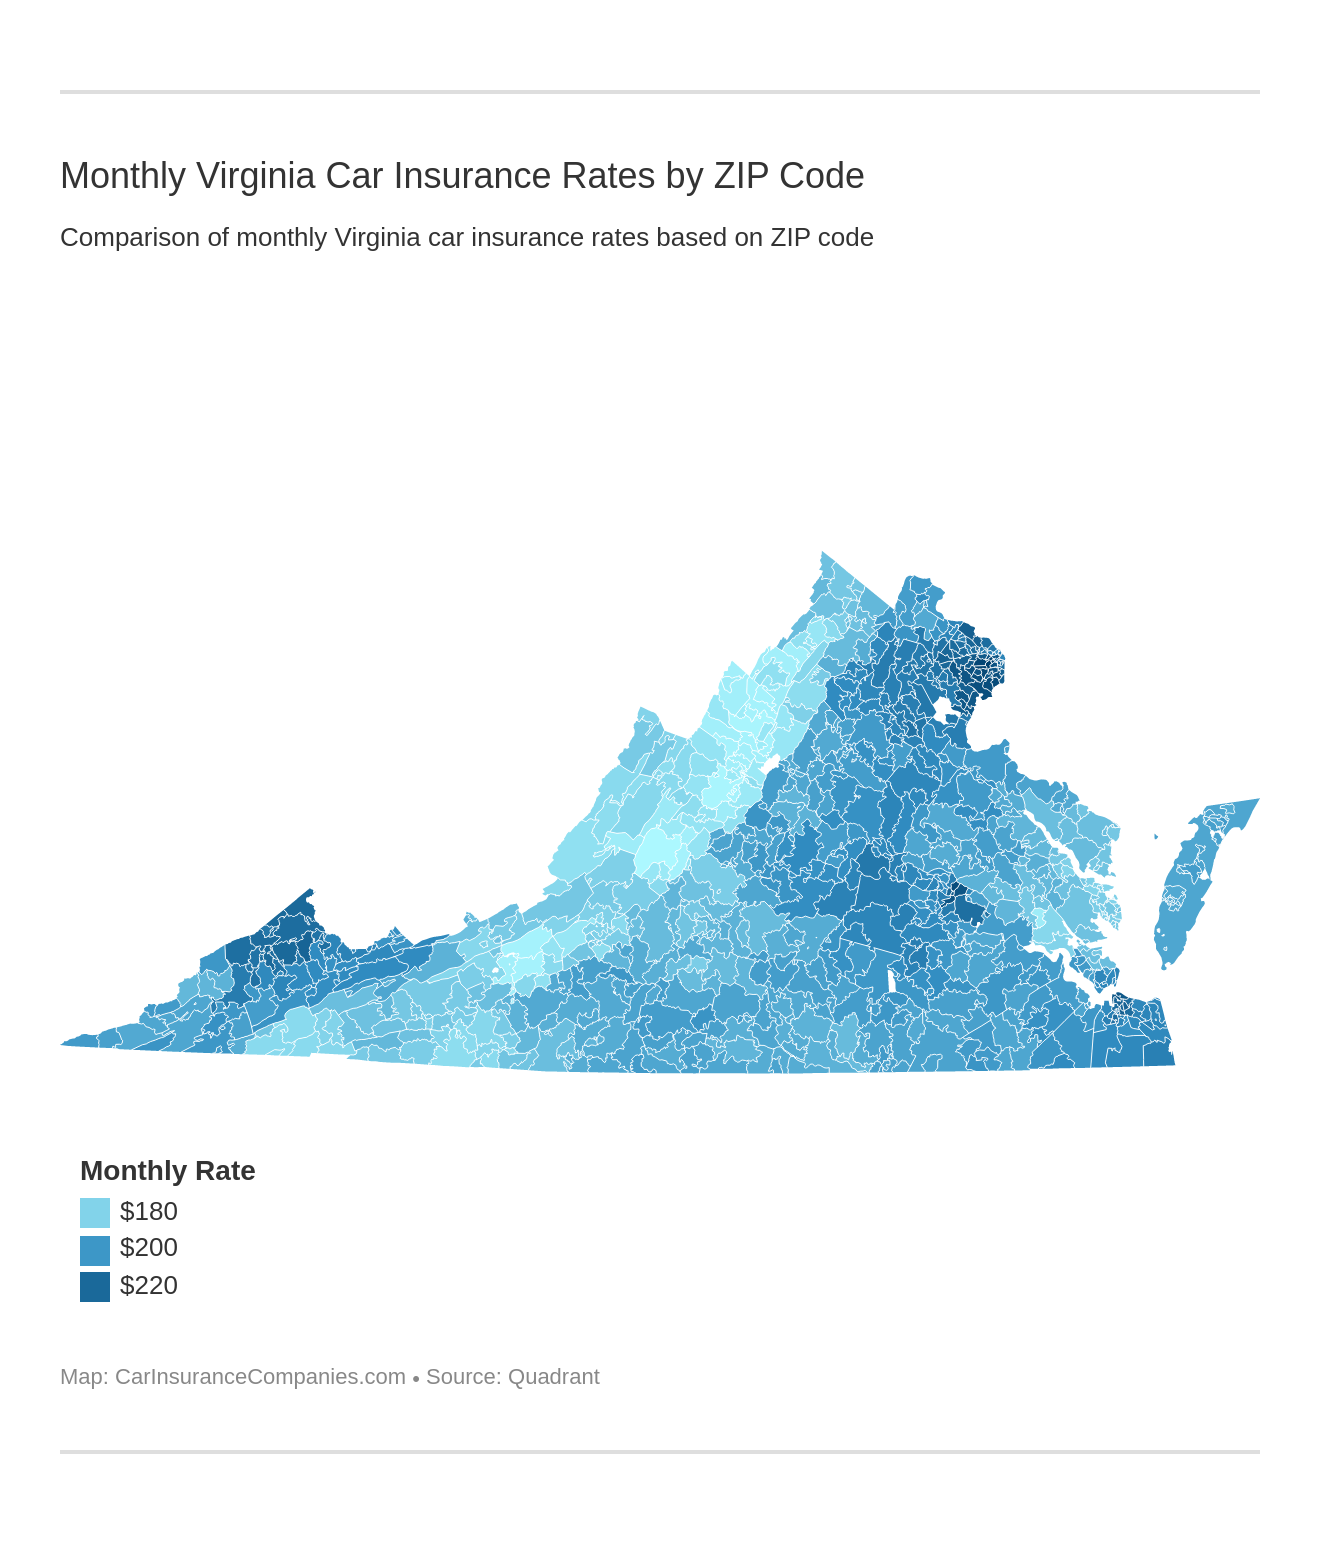 Monthly Virginia Car Insurance Rates by ZIP Code